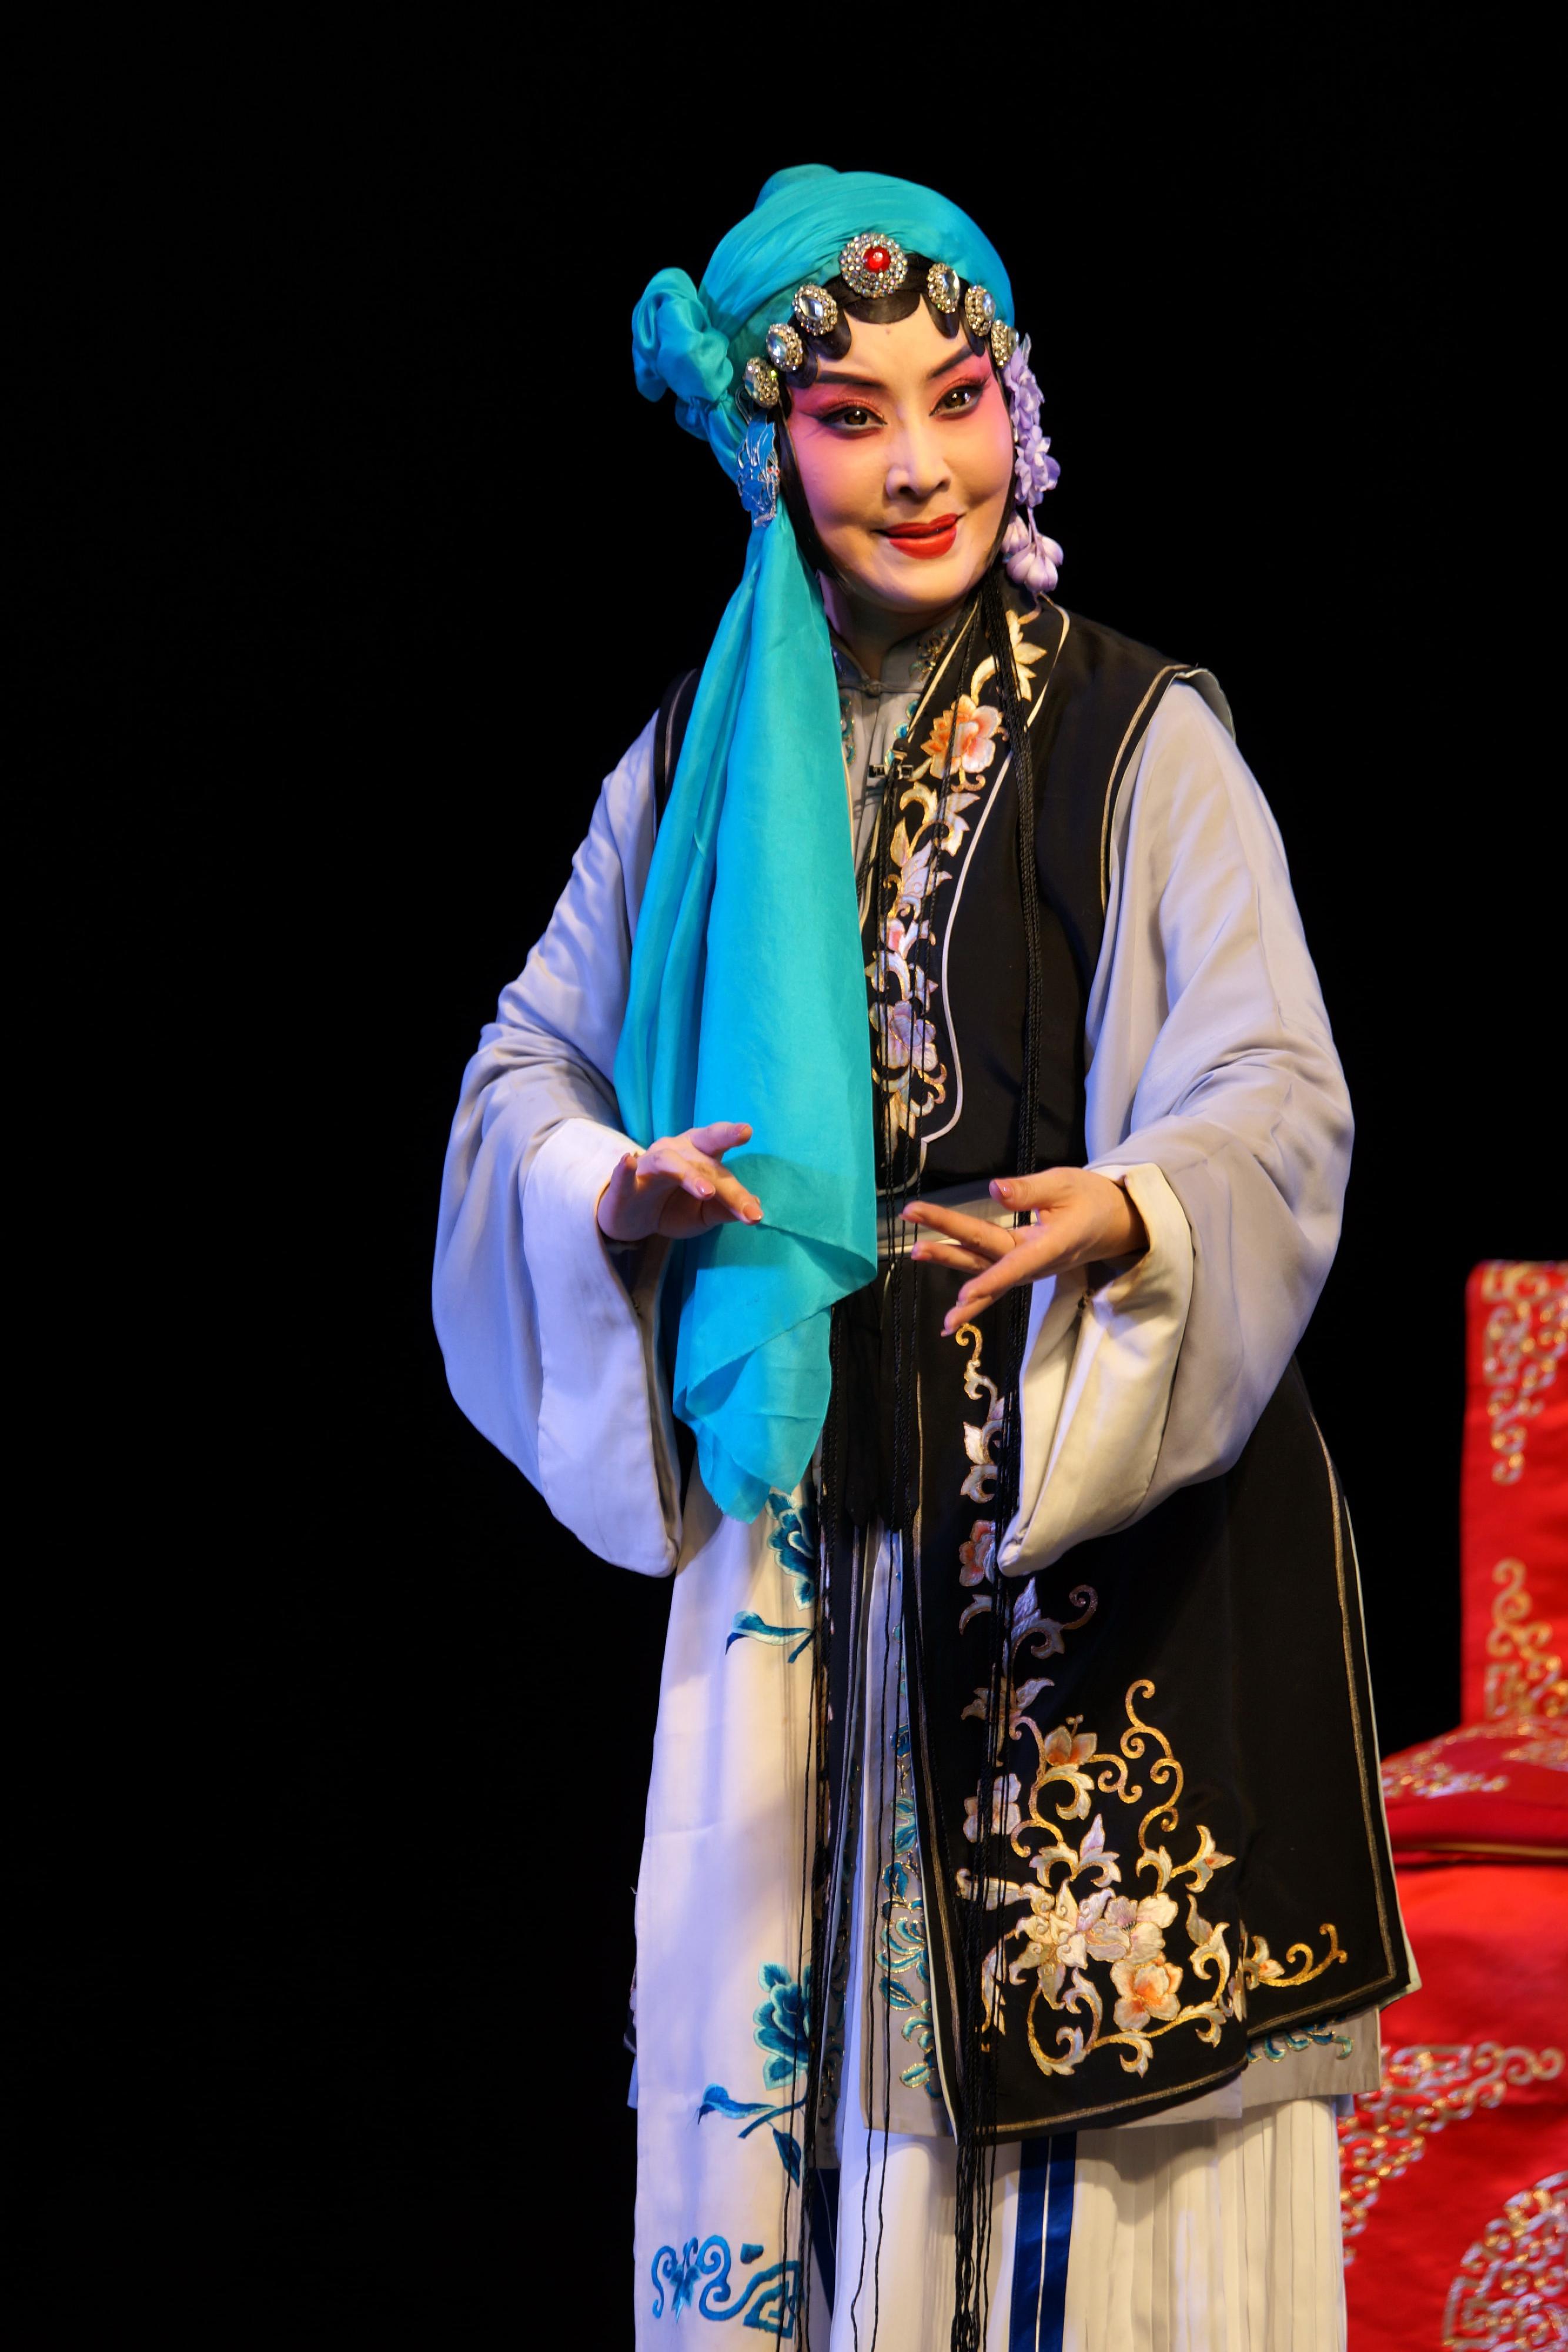 The inaugural Chinese Culture Festival will stage three classic Northern Kunqu opera plays in July. Photo shows a scene from the performance "The Female Narrative Singer" from "The Story of a Street Vendor".
